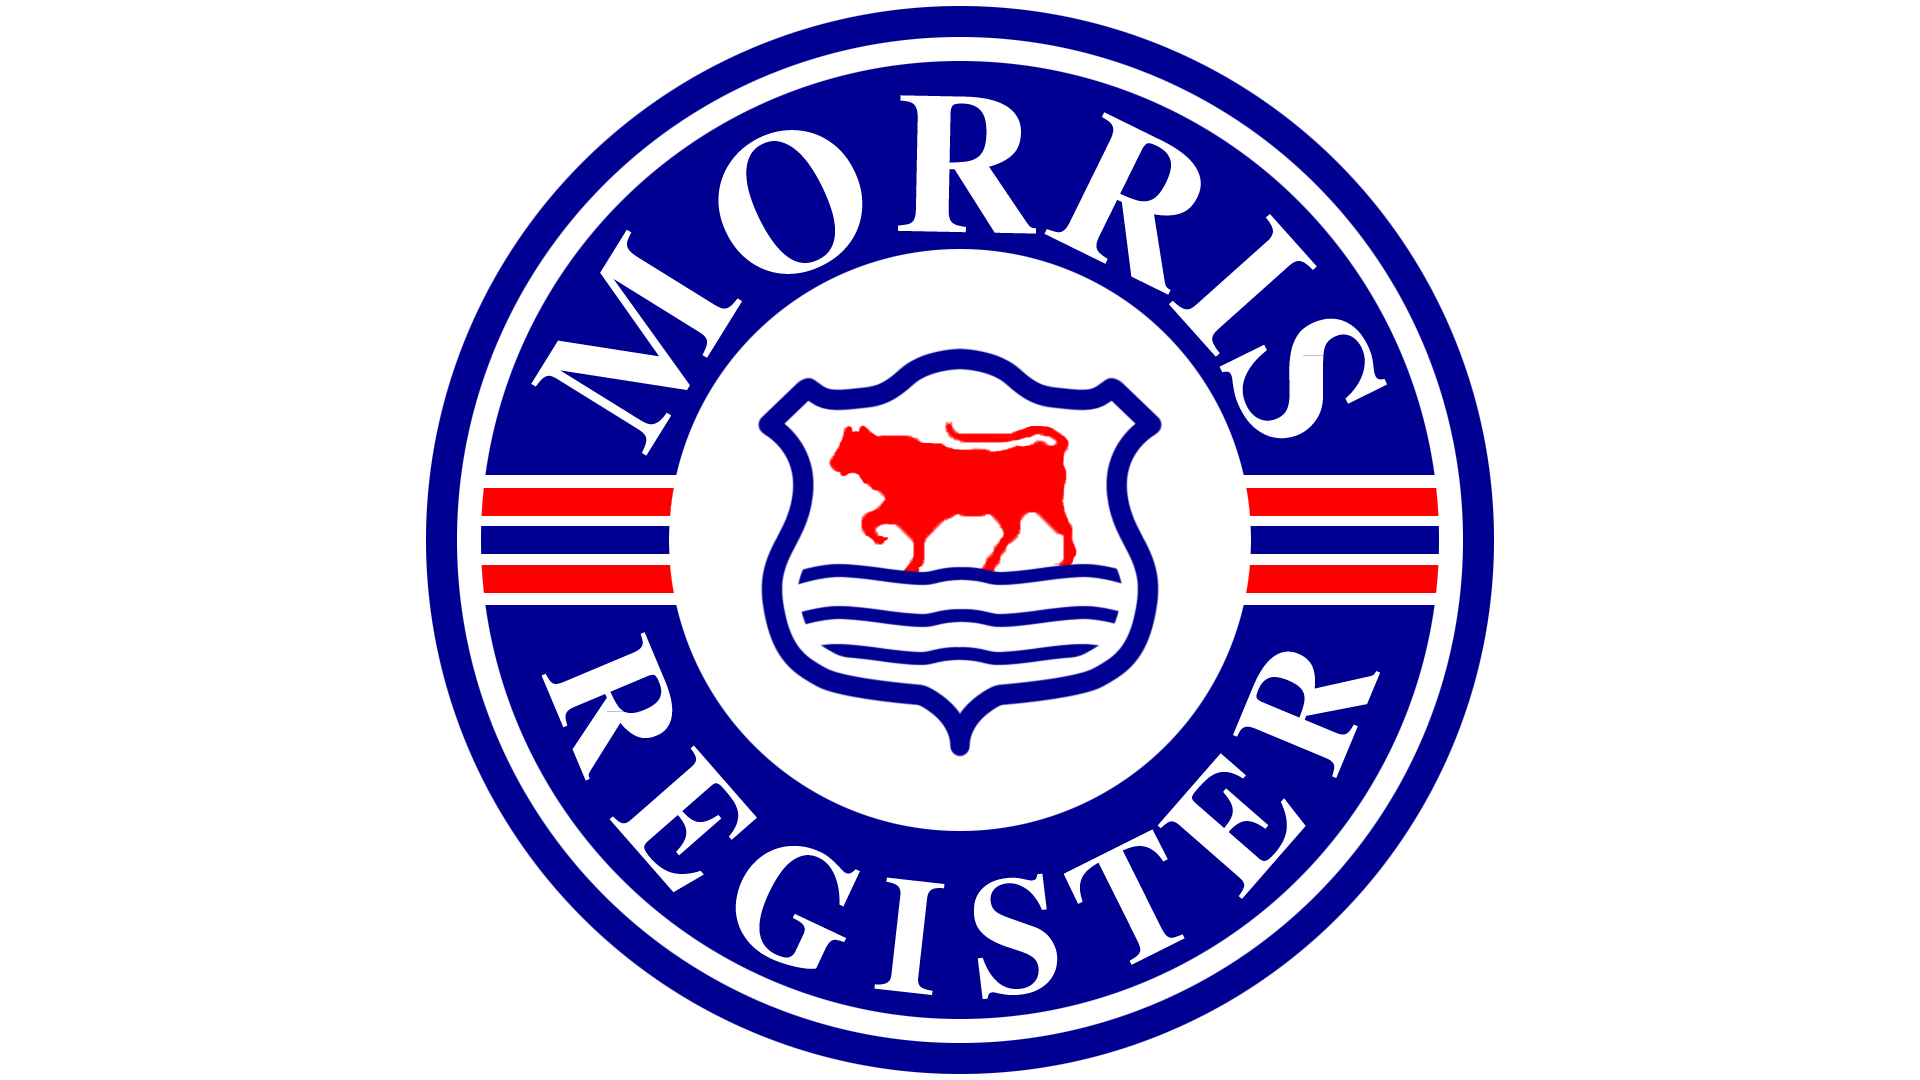 Morris Marina Car Insurance Rates (11 Models) Learn About Prices